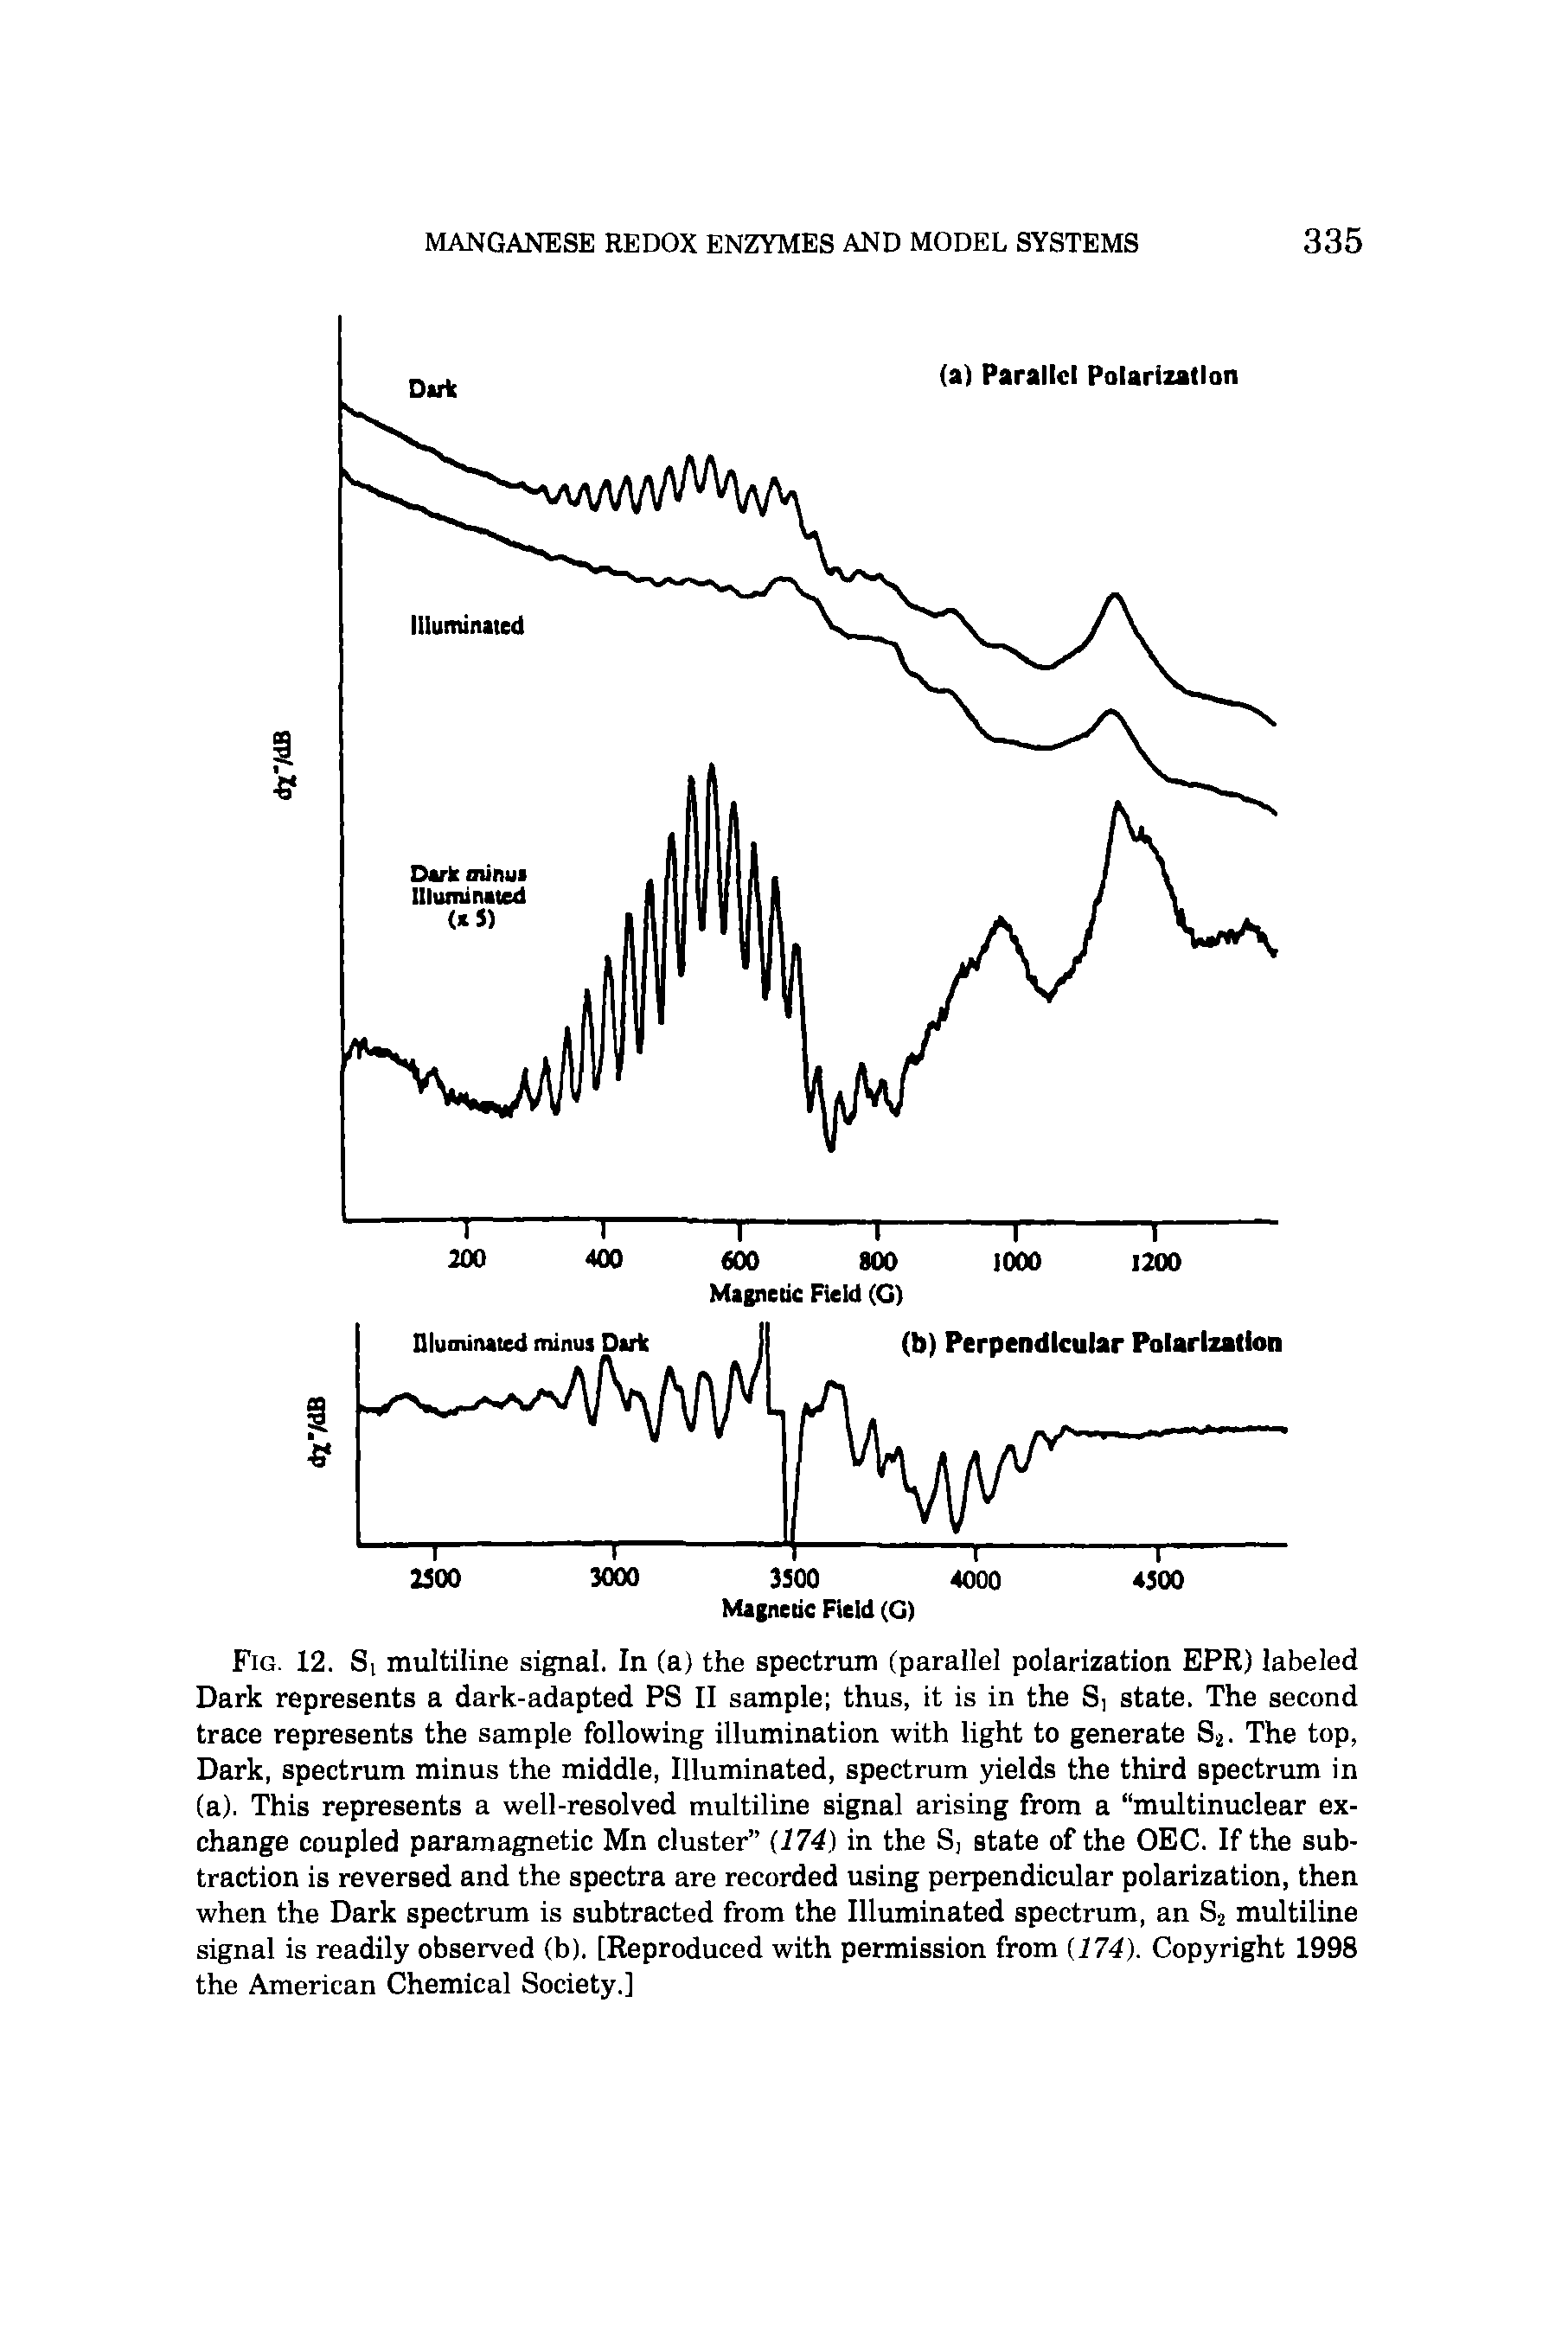 Fig. 12. S[ multiline signal. In (a) the spectrum (parallel polarization EPR) labeled Dark represents a dark-adapted PS II sample thus, it is in the S, state. The second trace represents the sample following illumination with light to generate S2. The top, Dark, spectrum minus the middle, Illuminated, spectrum yields the third spectrum in (a). This represents a well-resolved multiline signal arising from a multinuclear exchange coupled paramagnetic Mn cluster (174) in the S, state of the OEC. If the subtraction is reversed and the spectra are recorded using perpendicular polarization, then when the Dark spectrum is subtracted from the Illuminated spectrum, an S2 multiline signal is readily observed (b). [Reproduced with permission from (174). Copyright 1998 the American Chemical Society.]...